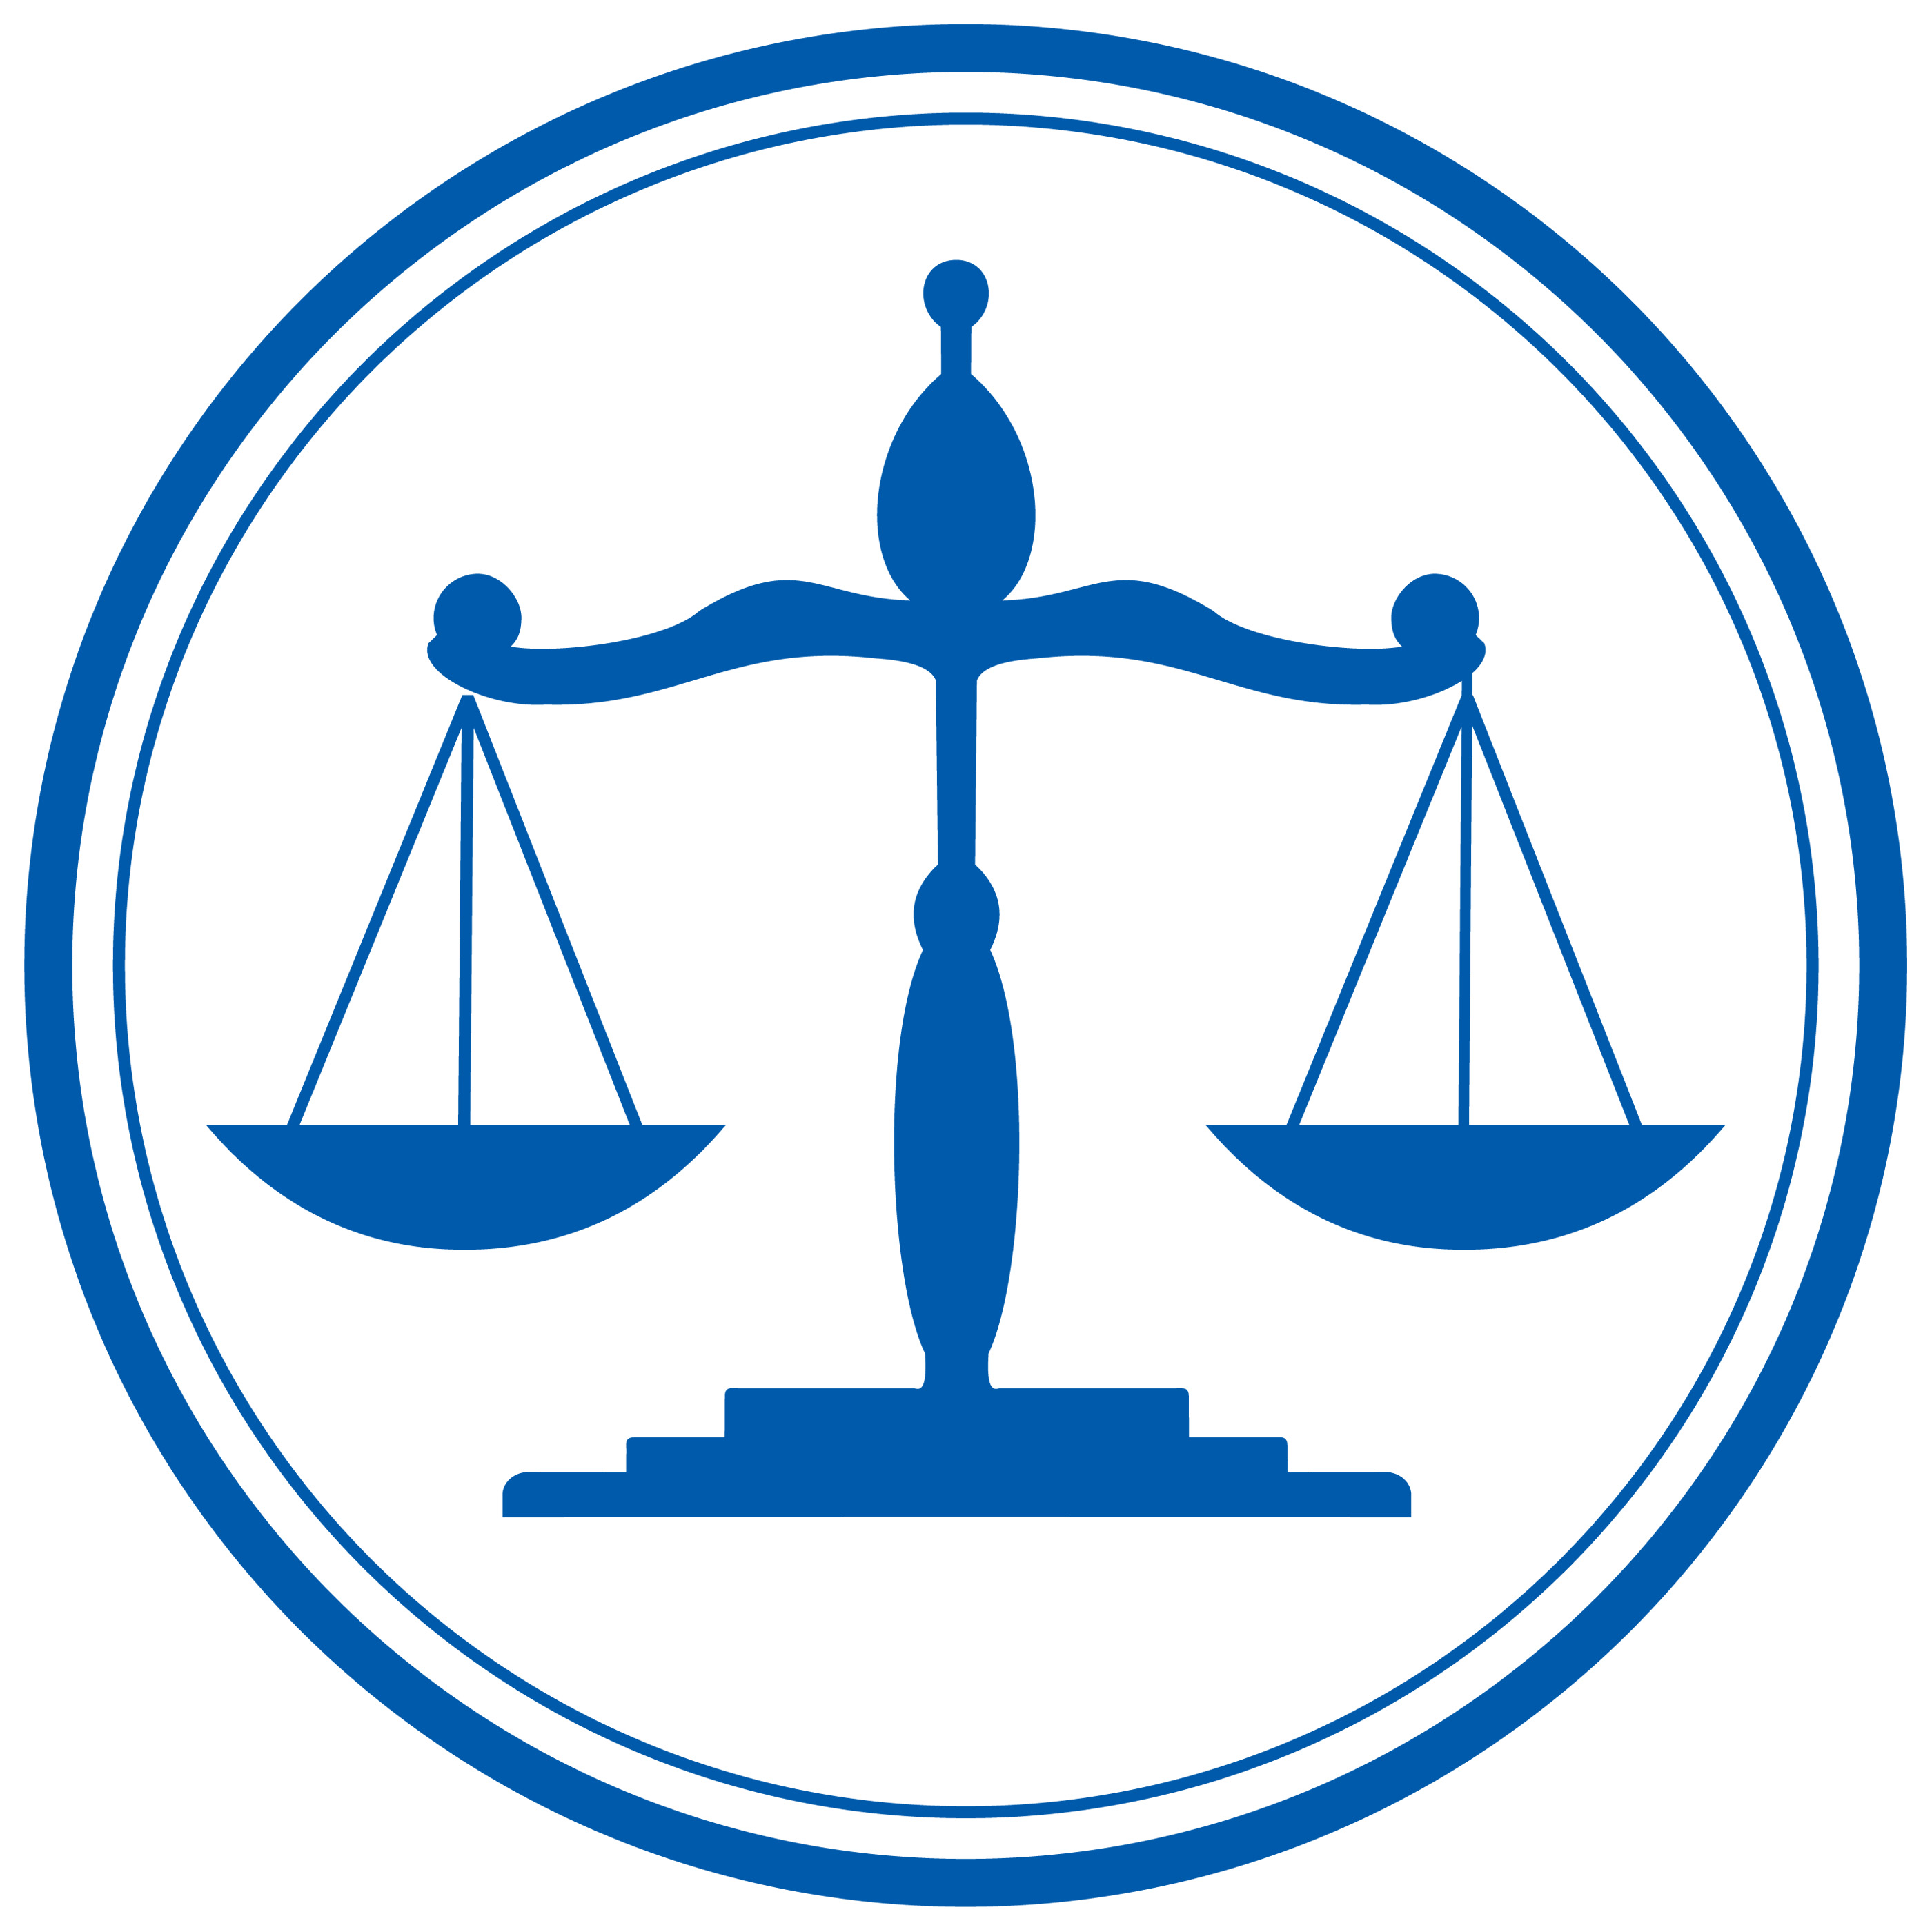 Pictures Of Scales Of Justice - ClipArt Best